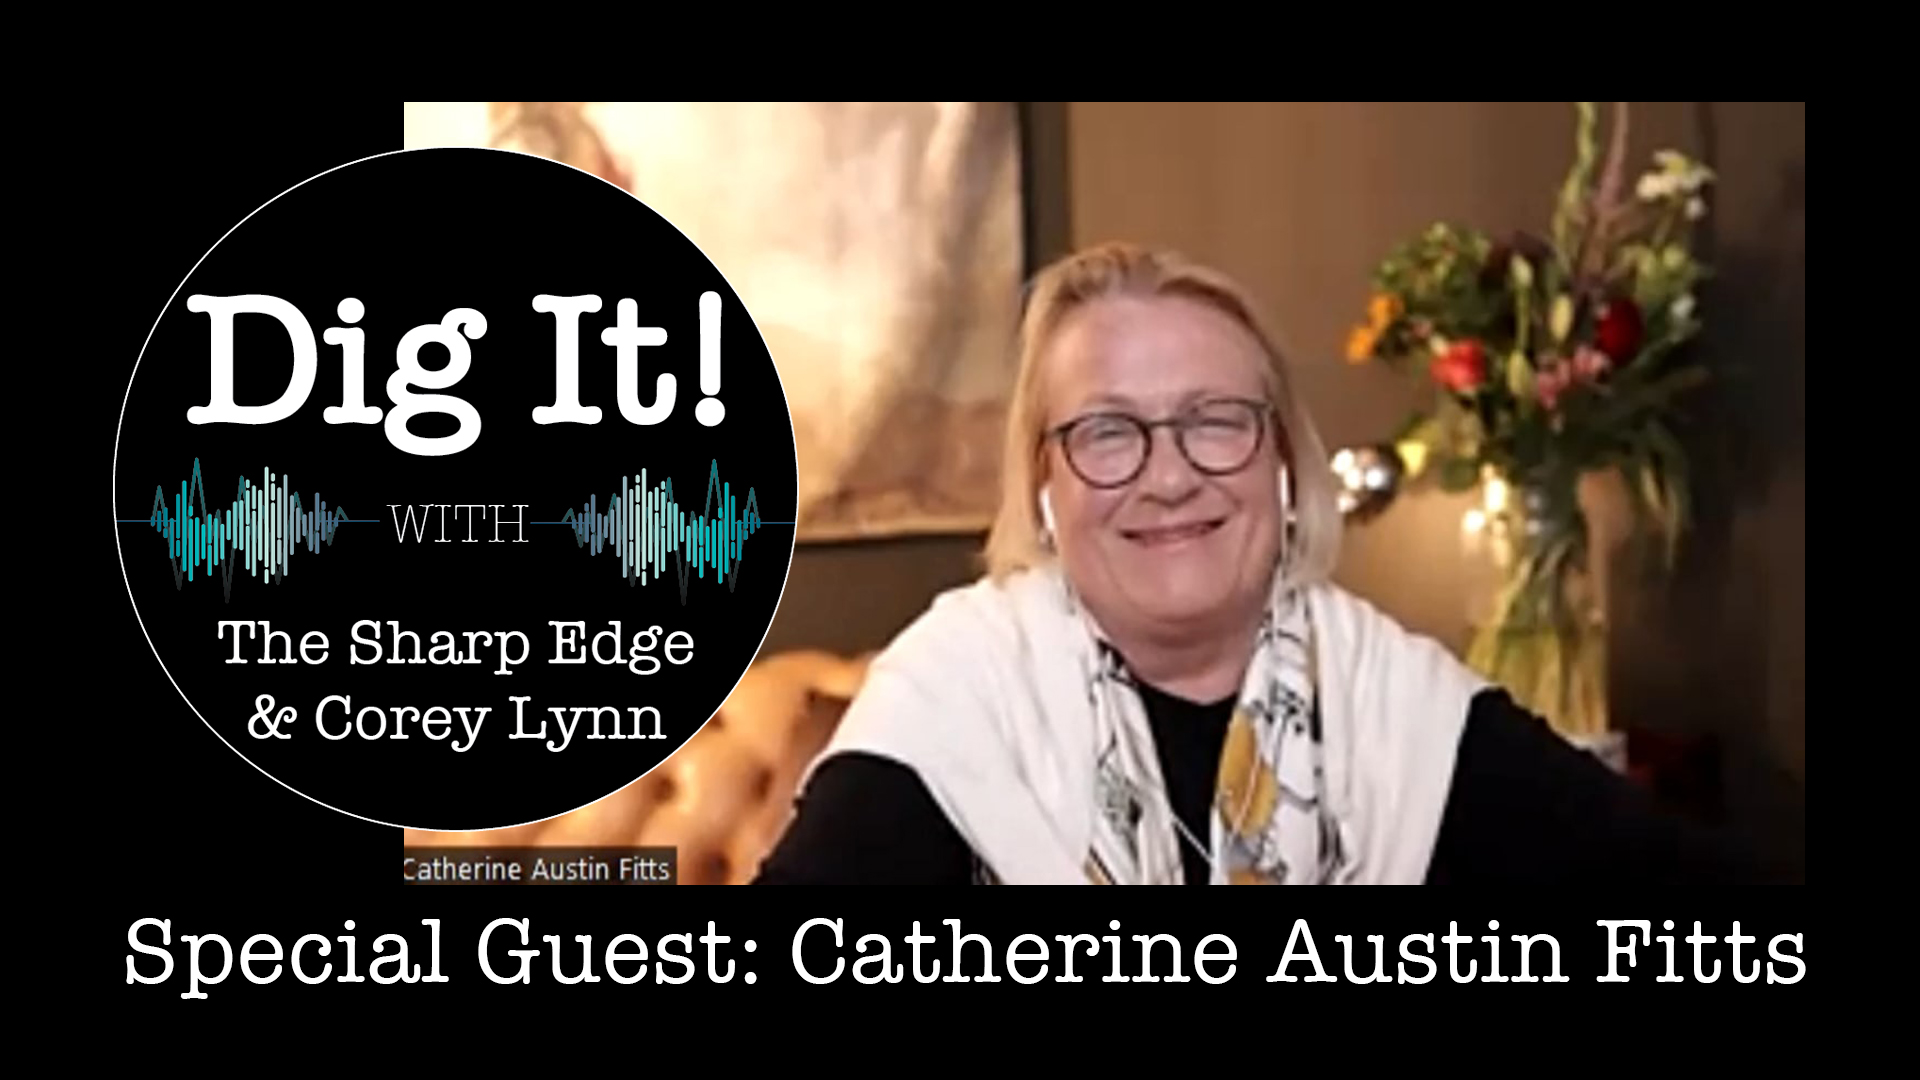 Dig It! with Special Guest Cathrine Austin Fitts